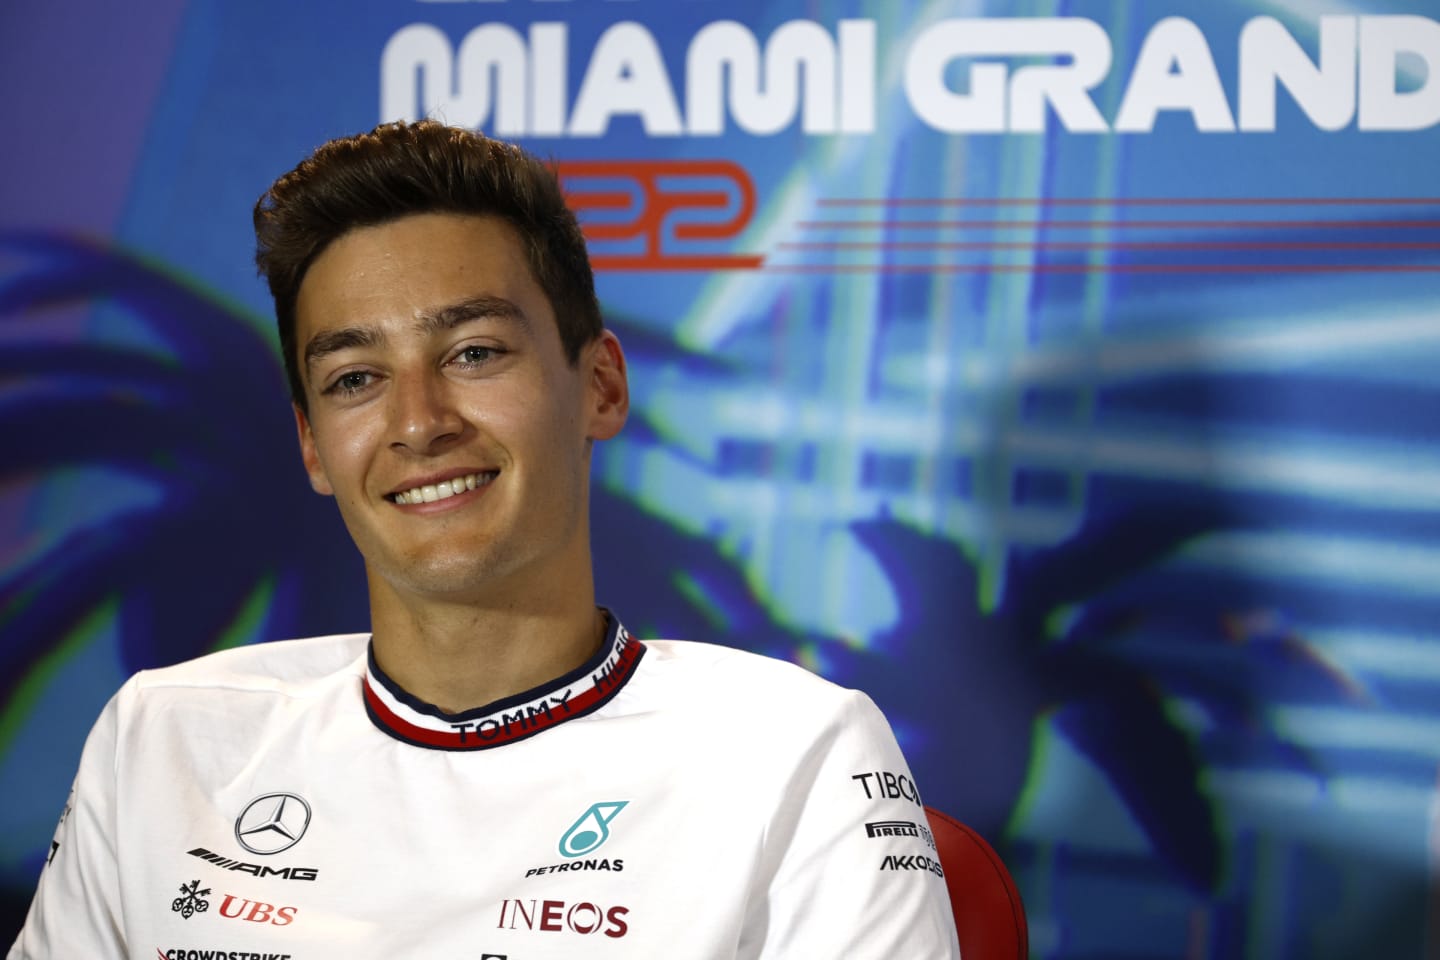 MIAMI, FLORIDA - MAY 06: George Russell of Great Britain and Mercedes talks in the Drivers Press Conference prior to practice ahead of the F1 Grand Prix of Miami at the Miami International Autodrome on May 06, 2022 in Miami, Florida. (Photo by Jared C. Tilton/Getty Images)